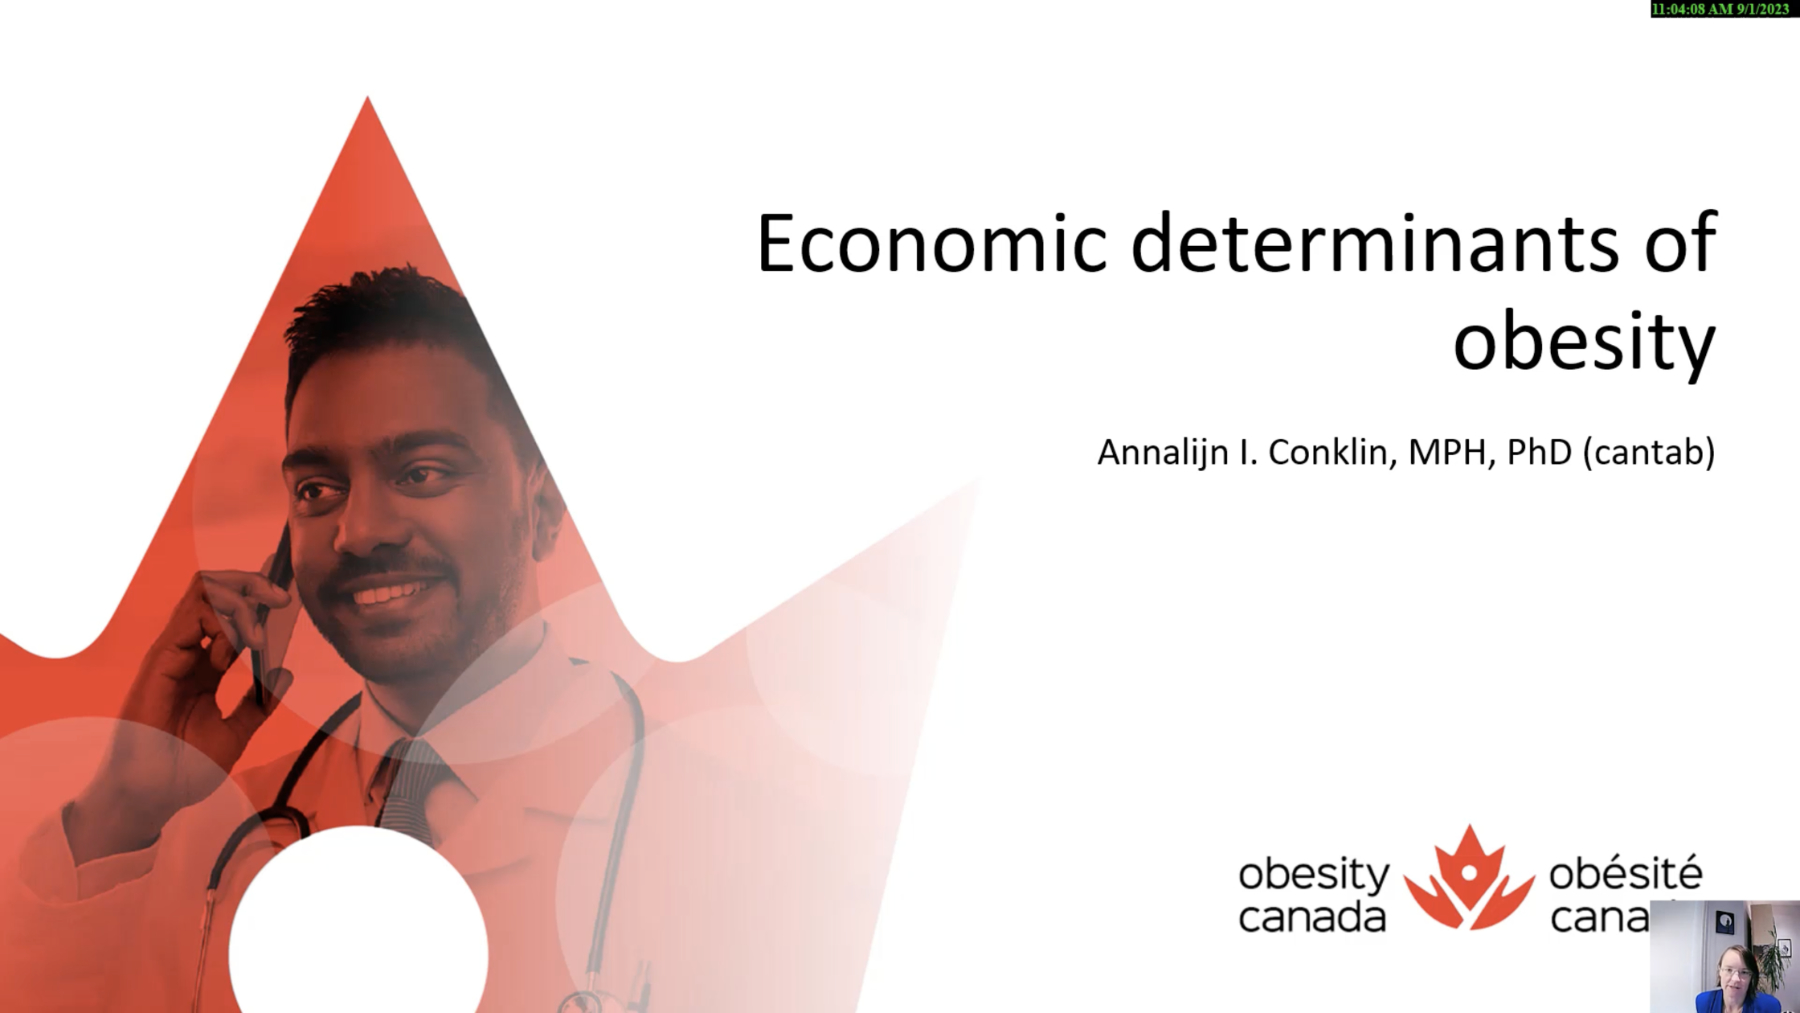 Title slide of a presentation titled "Disparities in Obesity Management: Racism in Medicine and the Flawed use of BMI" by Dr. Sean Wharton. The slide features the Obesity Canada logo and a Canadian flag design.